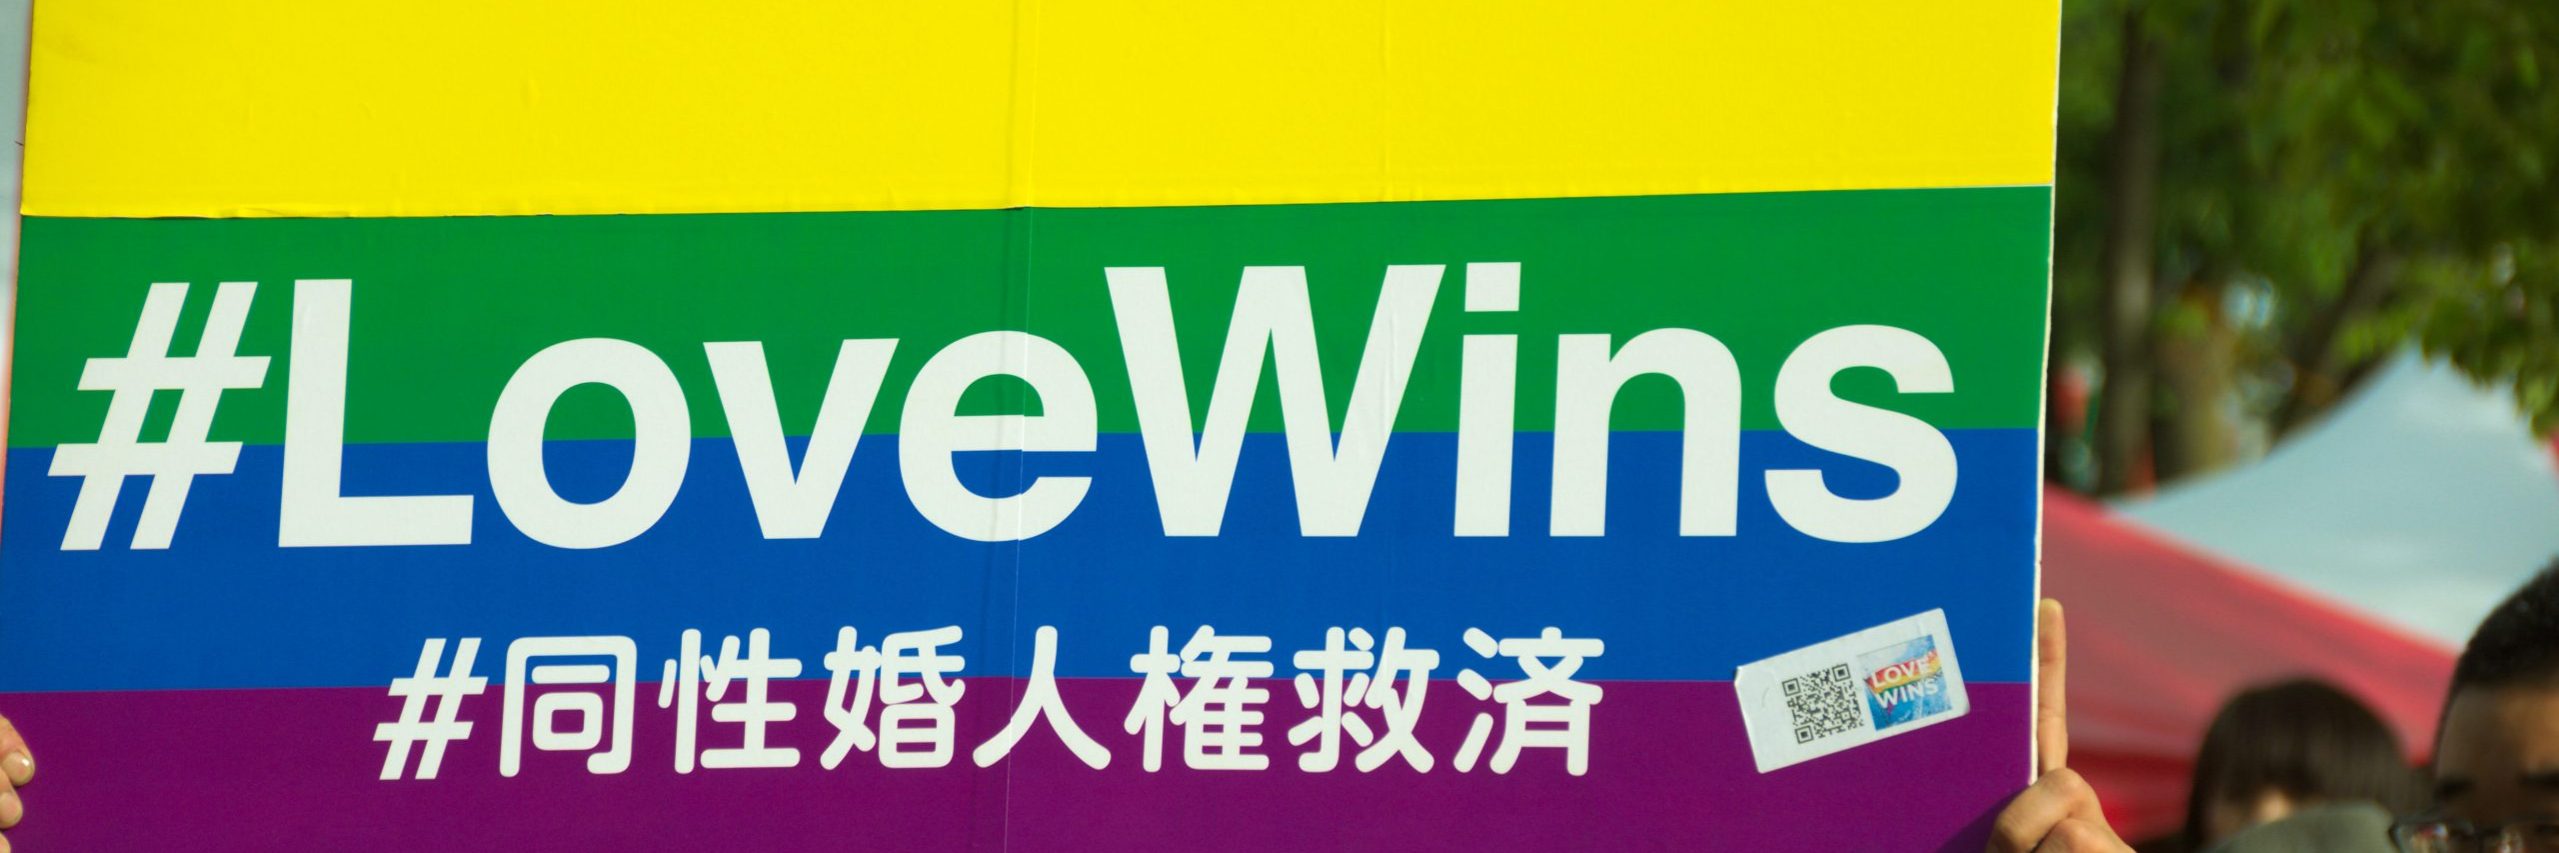 Sign held up in Yoyogi park in Tokyo, Japan, May 8, 2016 with the words "Love Wins"